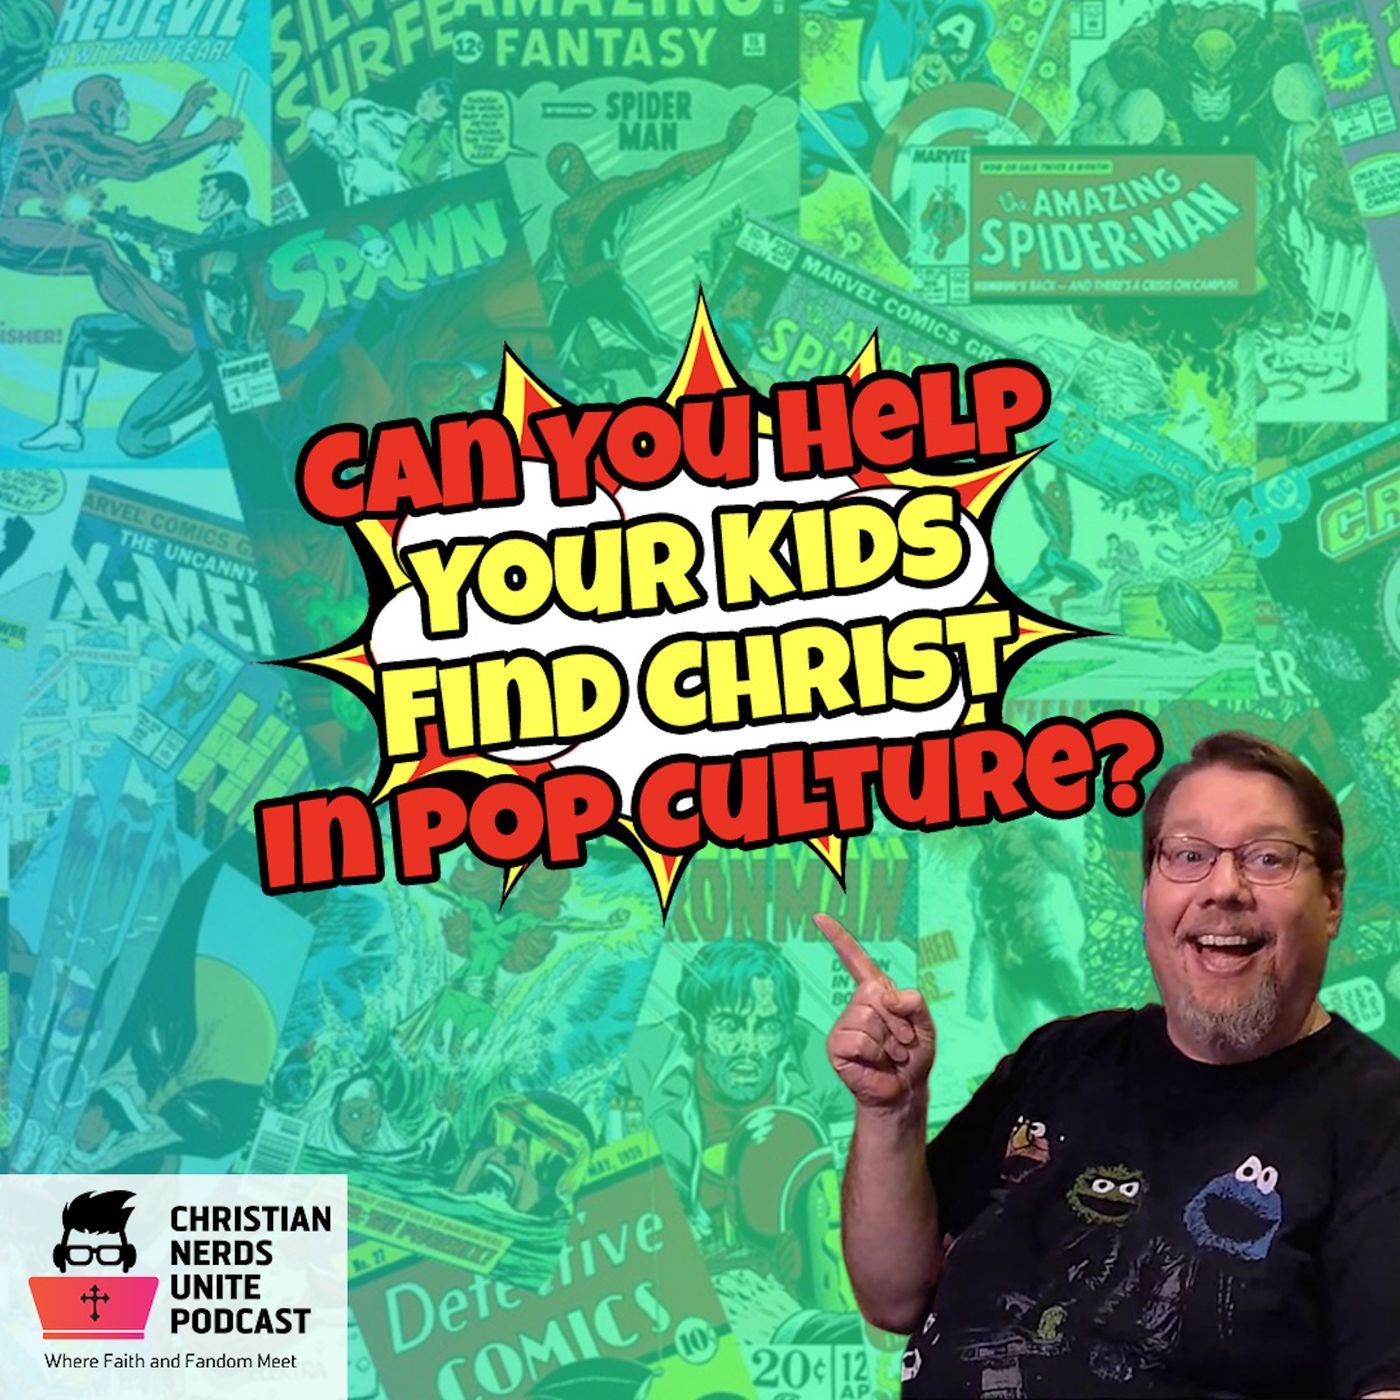 Can You Help Your Kids Find Christ In Pop Culture?